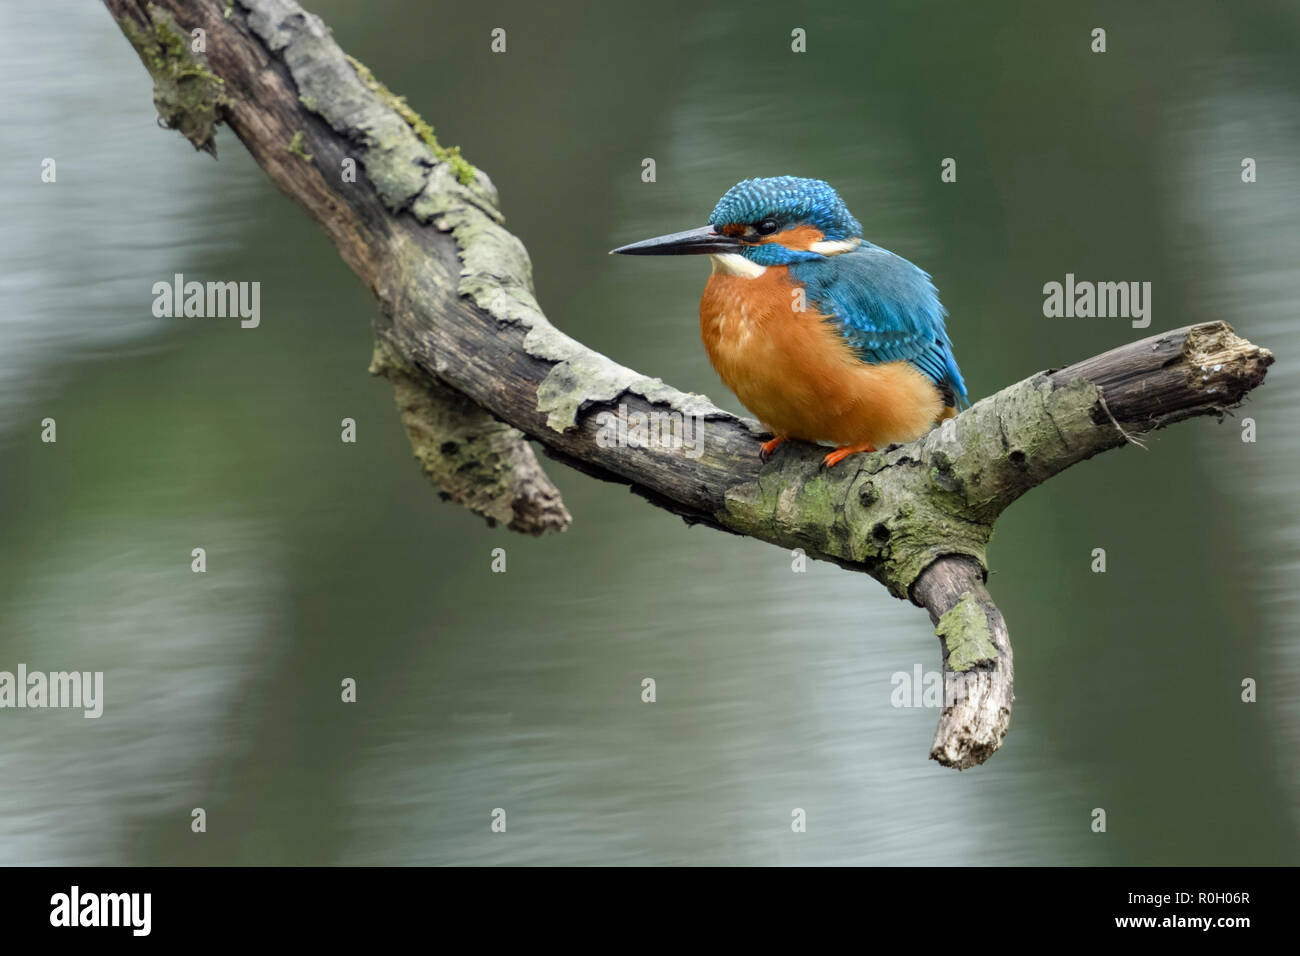 Eurasian Kingfisher / Eisvogel  ( Alcedo atthis ), male bird, perched on a branch close above the water above a mirroring tree, wildlife, Europe. Stock Photo